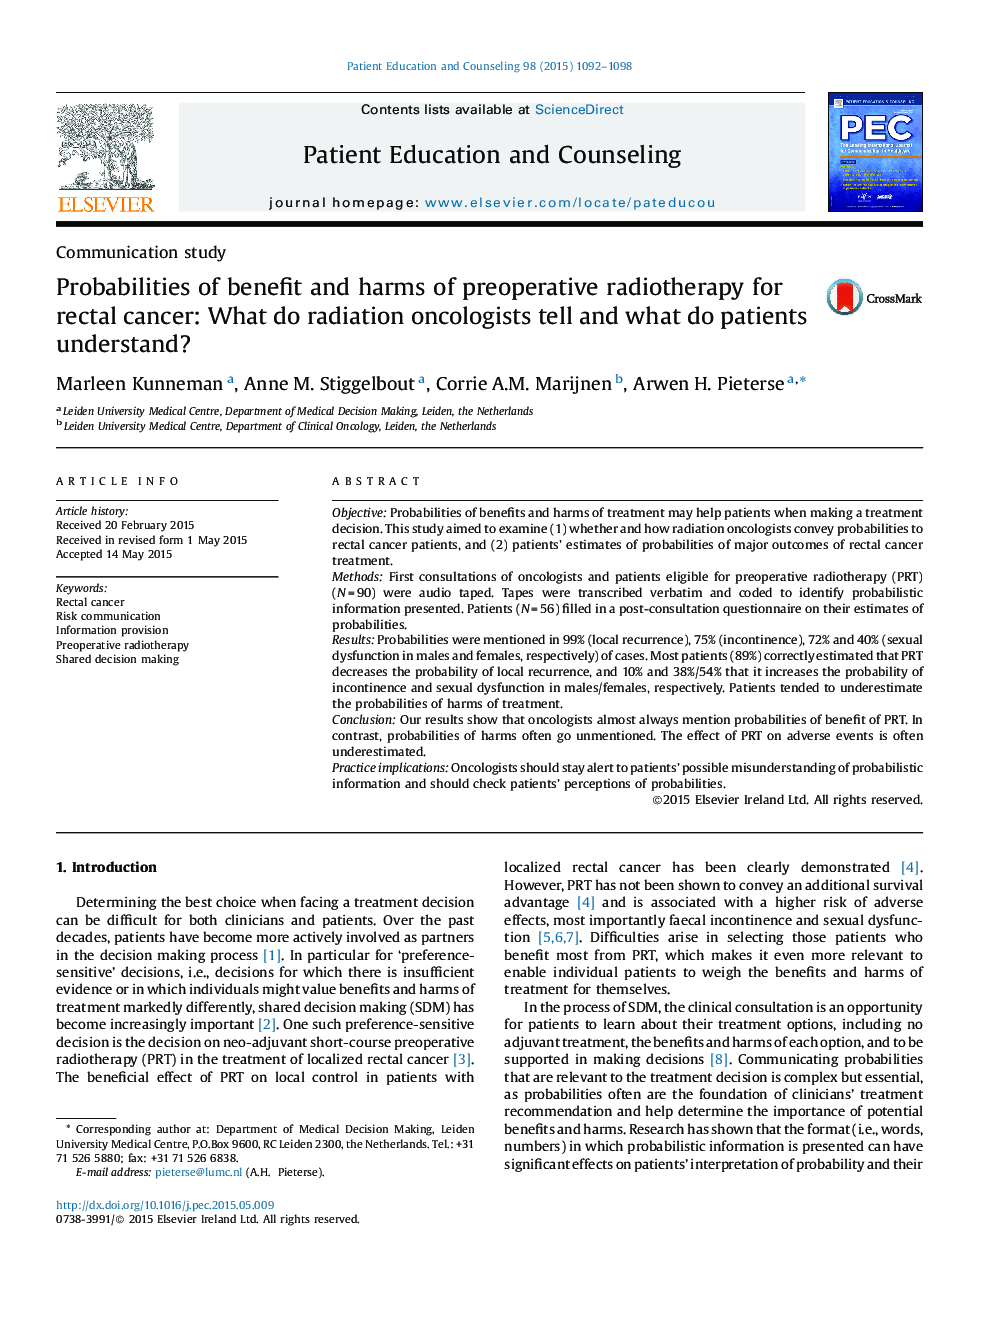 Probabilities of benefit and harms of preoperative radiotherapy for rectal cancer: What do radiation oncologists tell and what do patients understand?